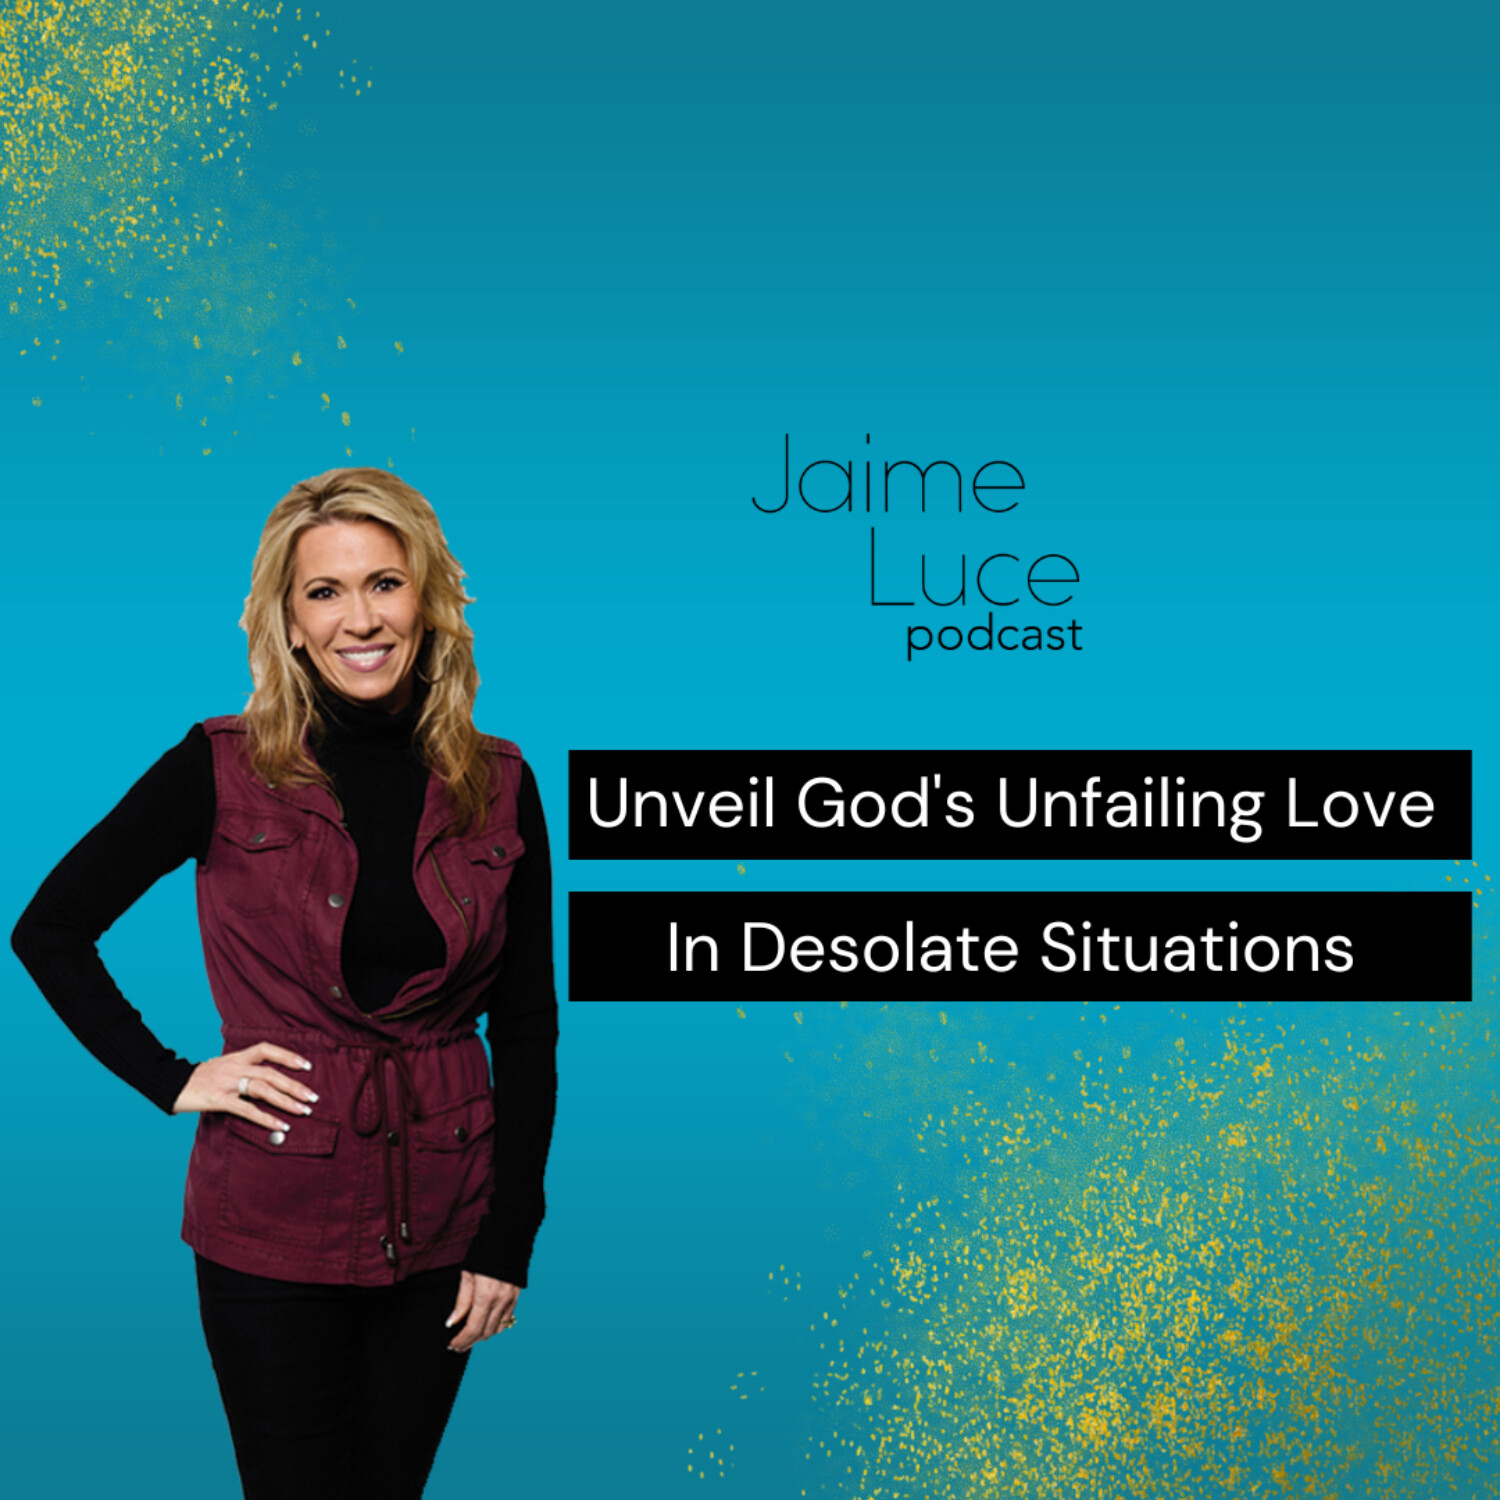 Unveil God's Unfailing Love In Desolate Situations